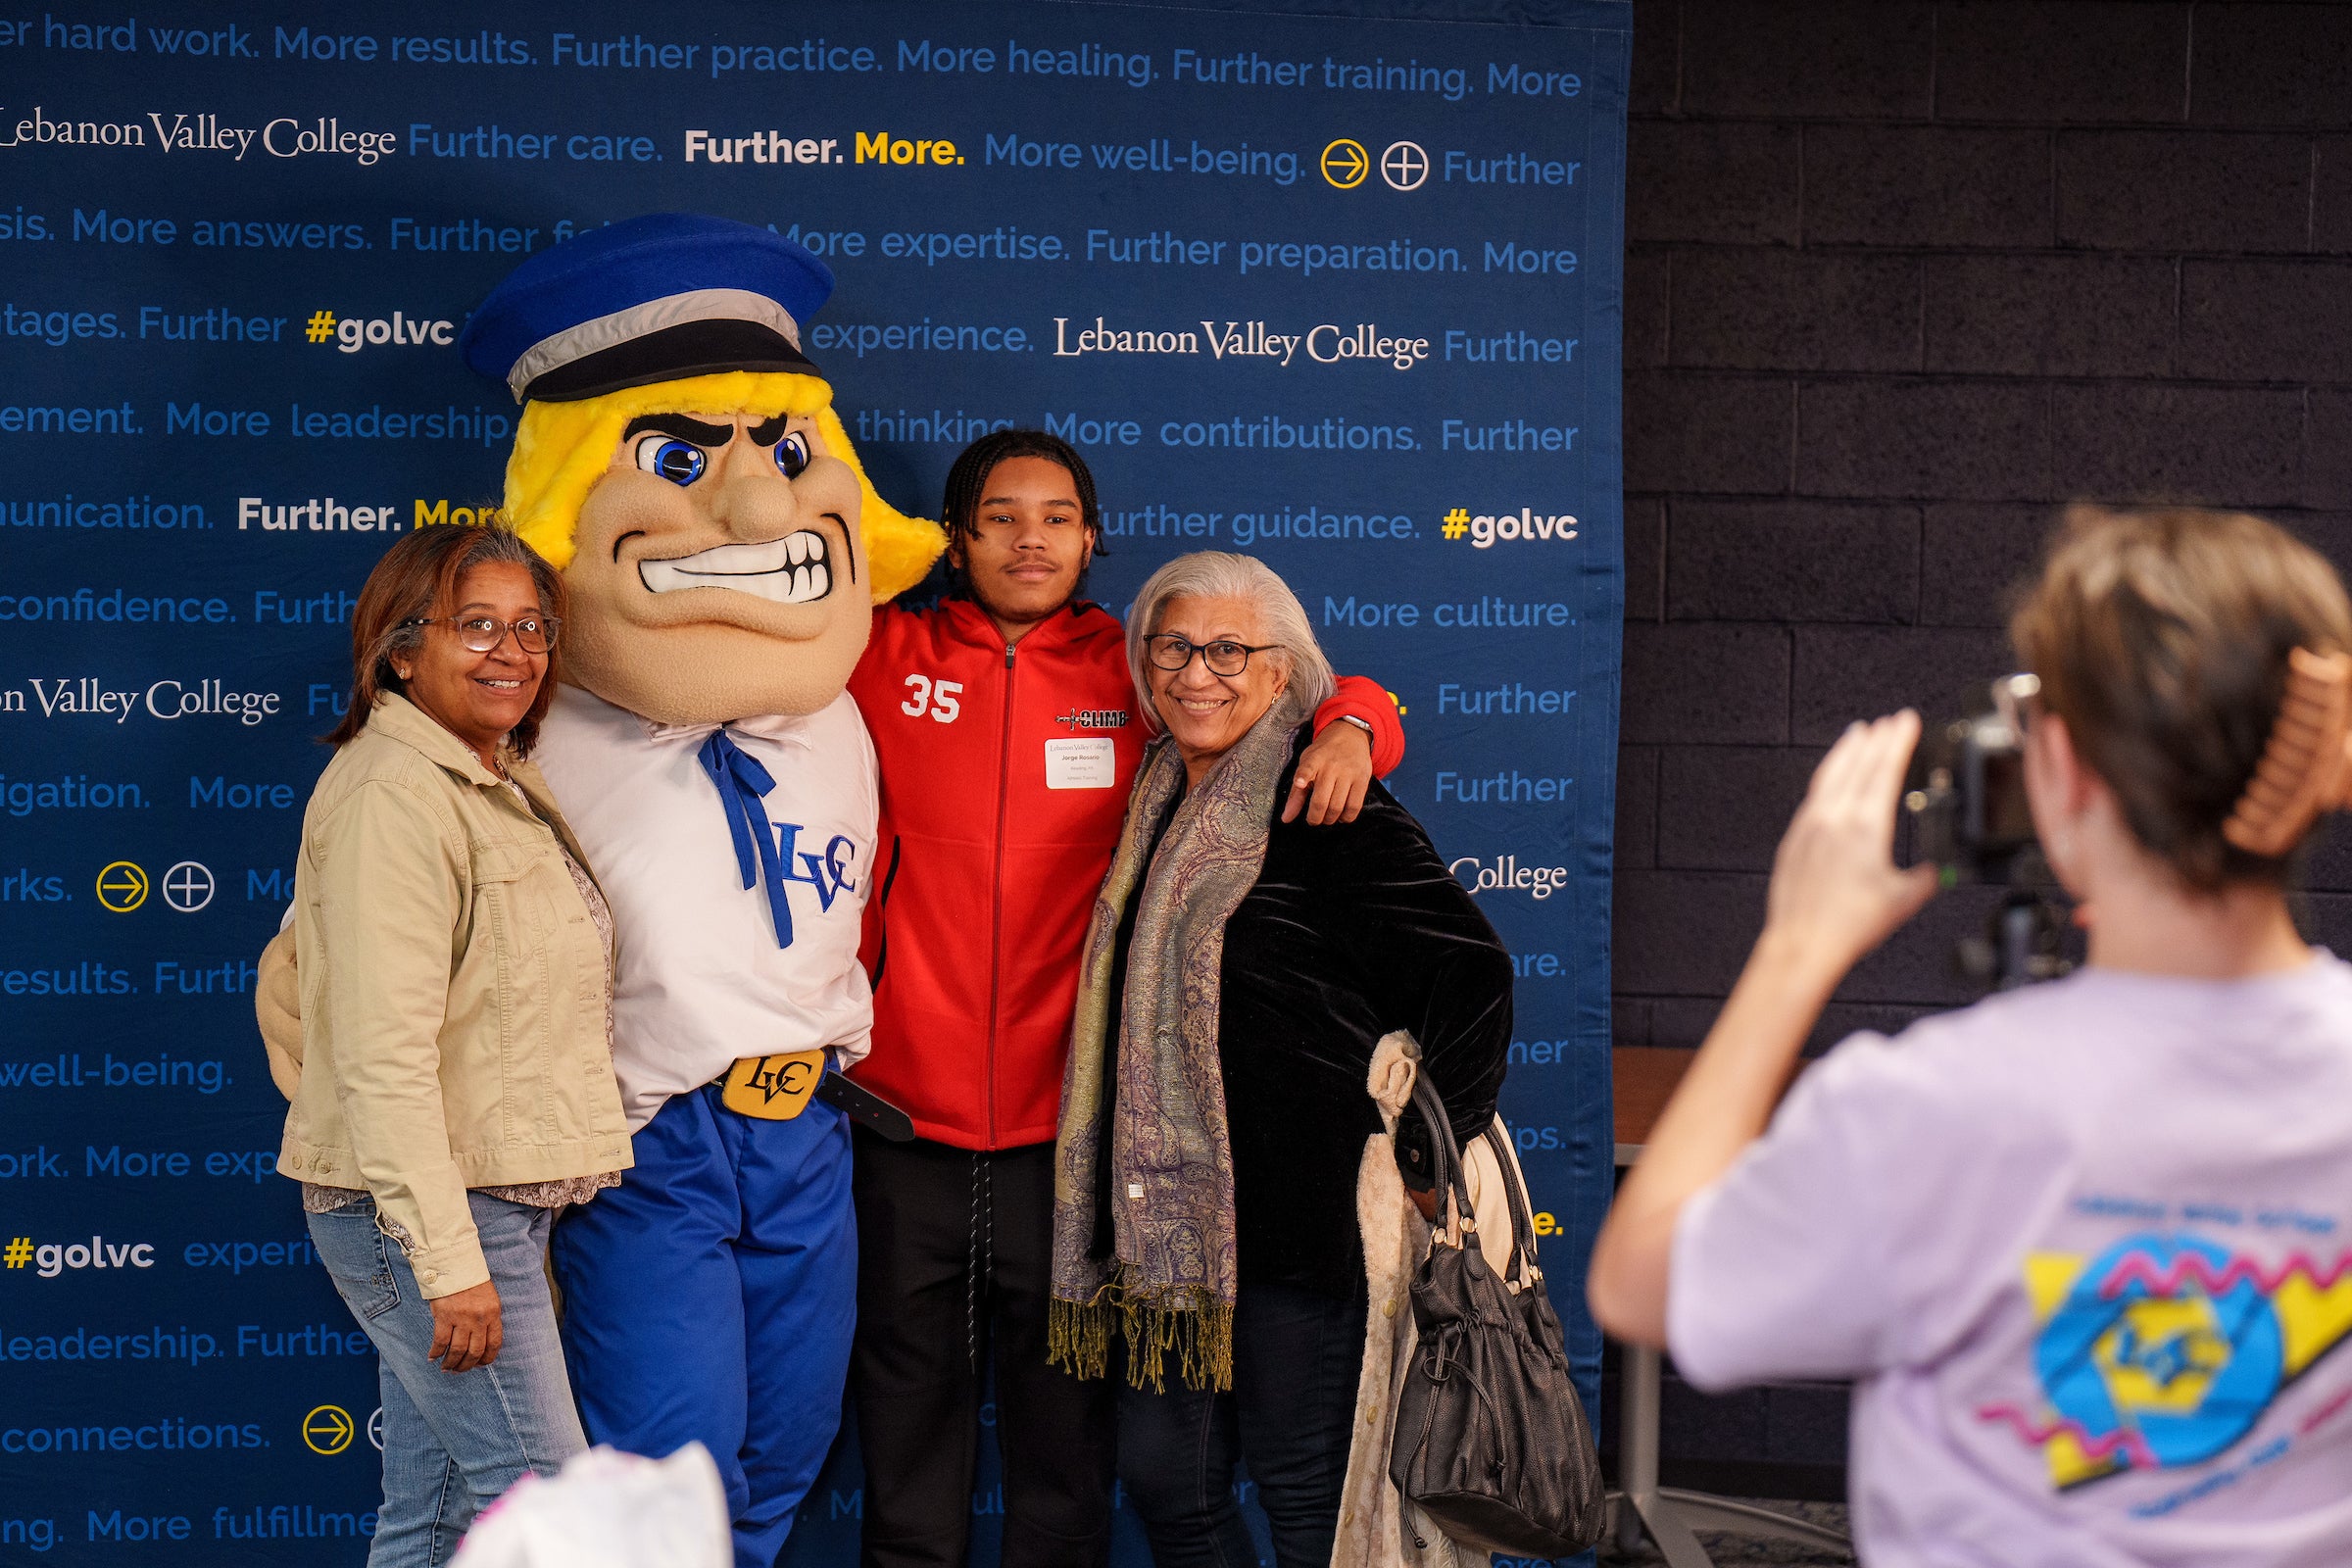 Student poses with family and the Dutchman mascot during event